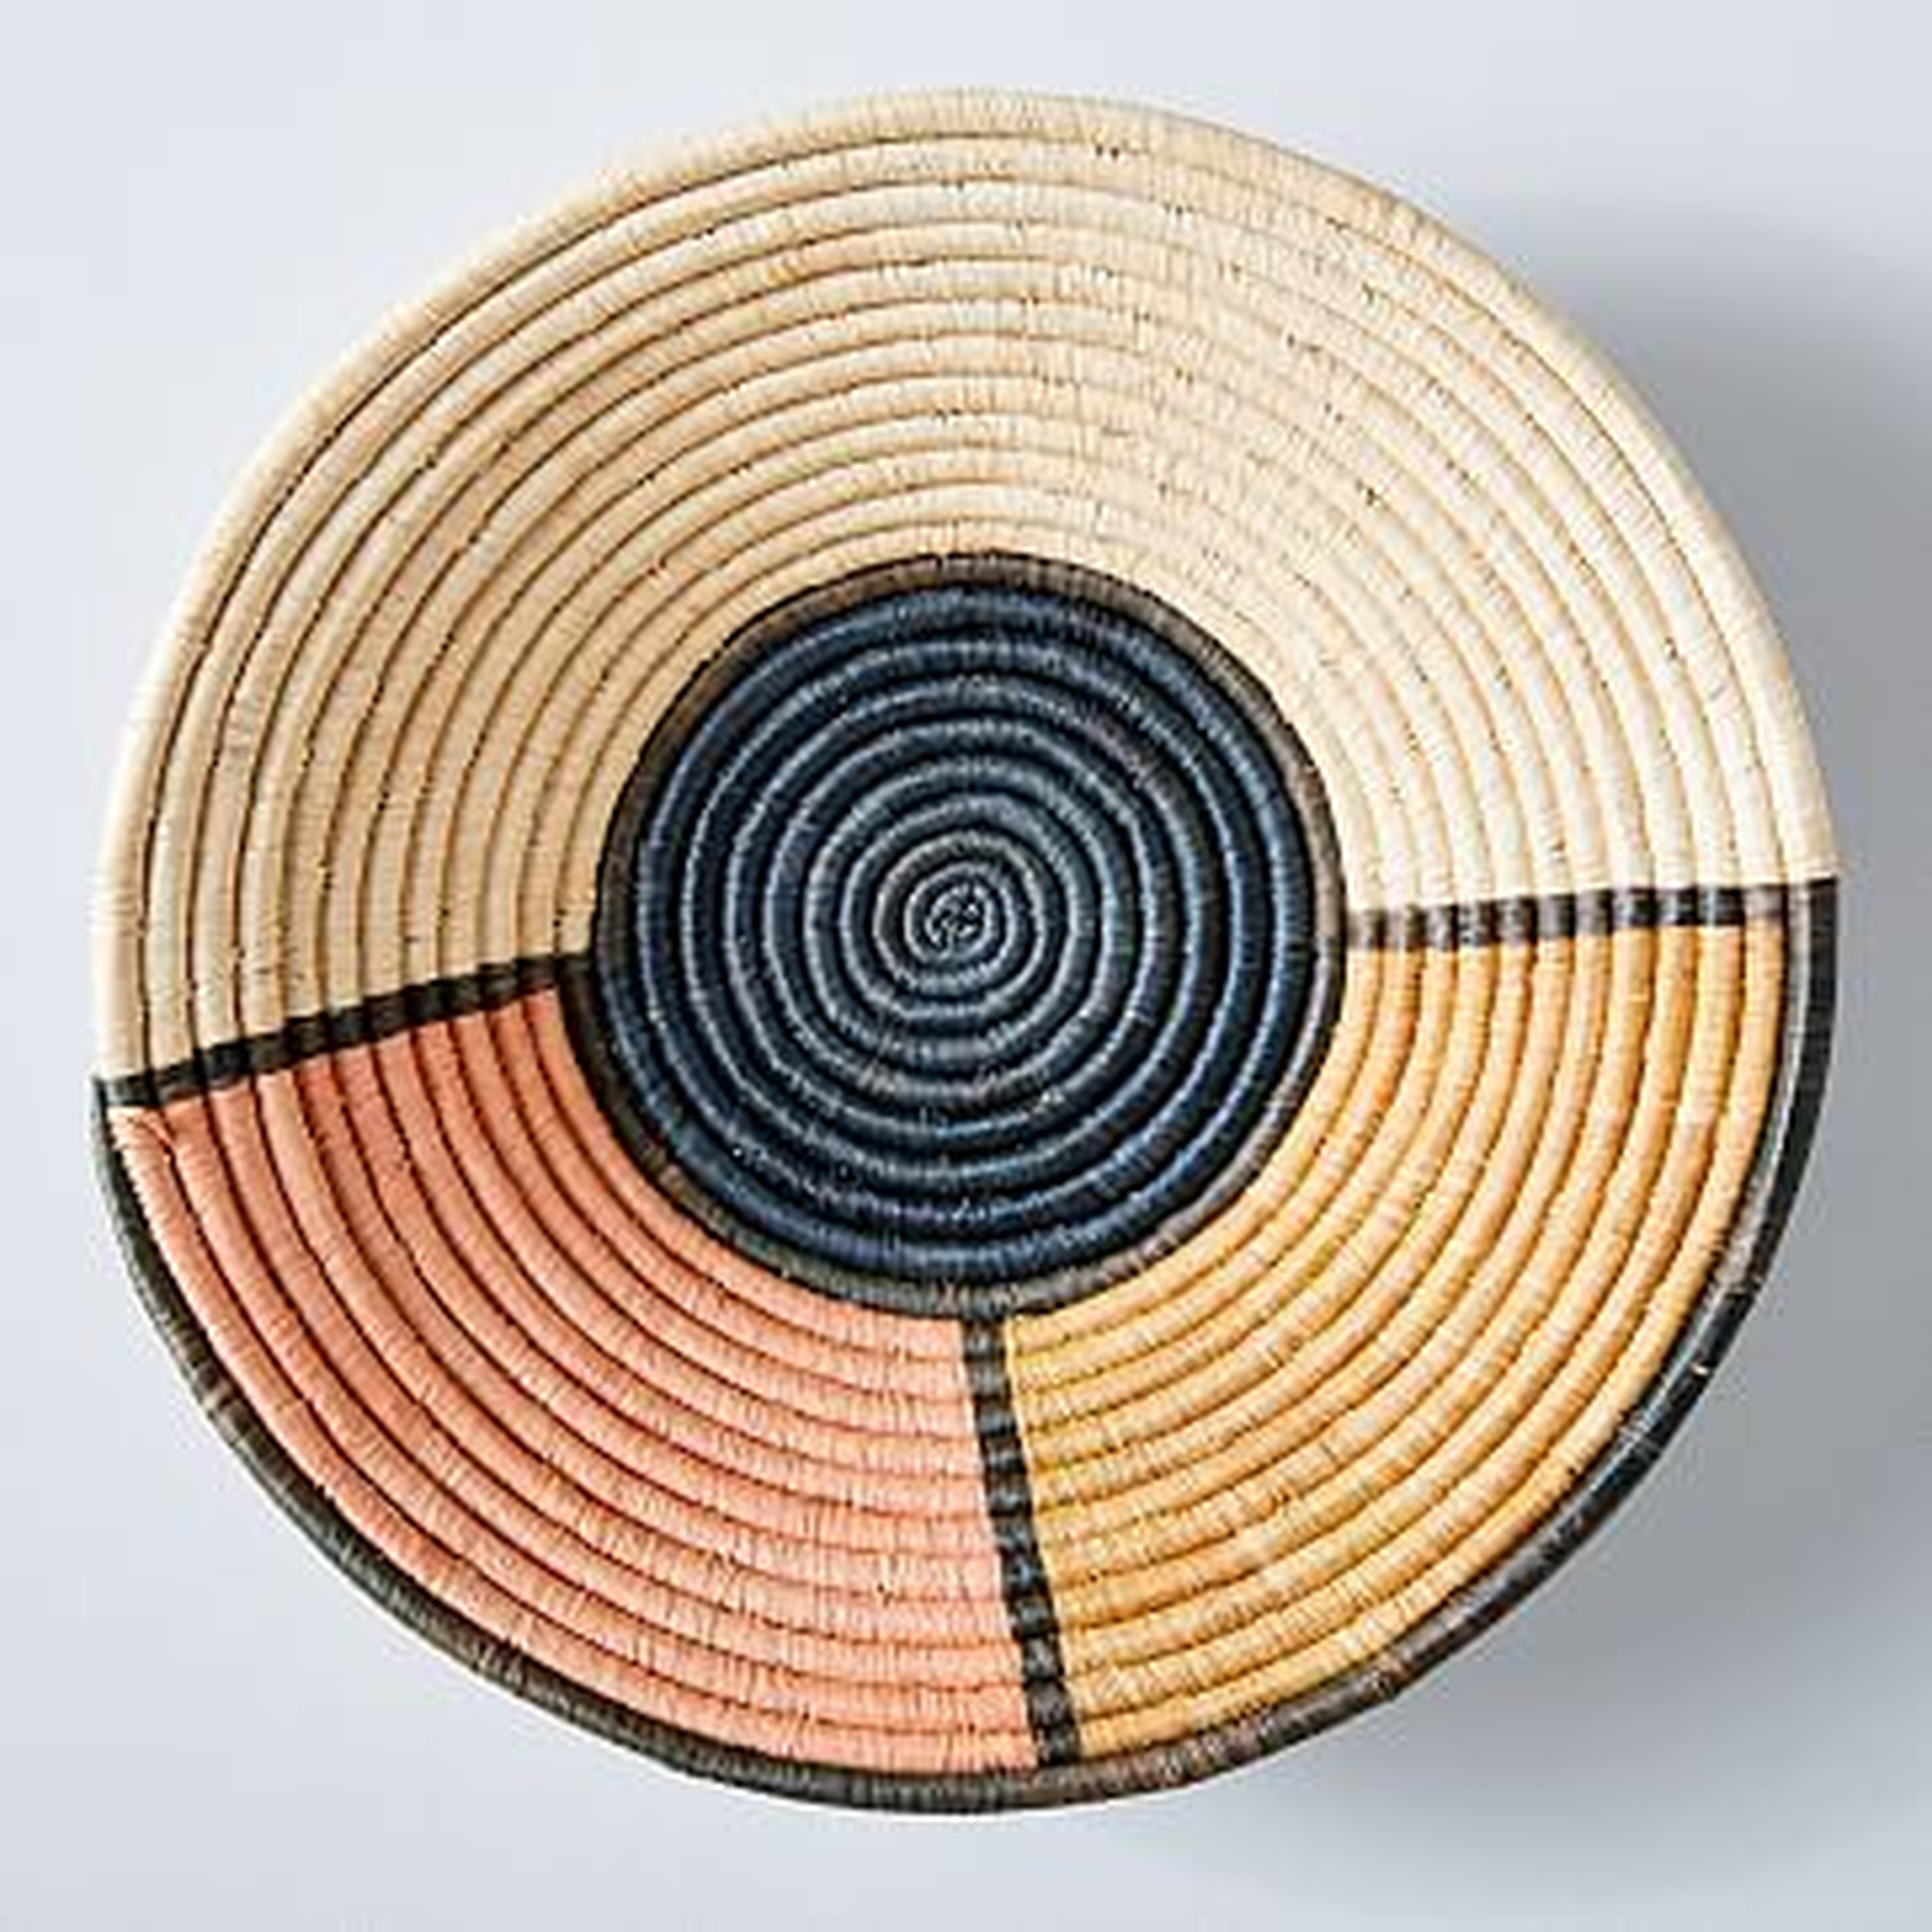 Woven Colorblocked Wall Basket, Large - West Elm